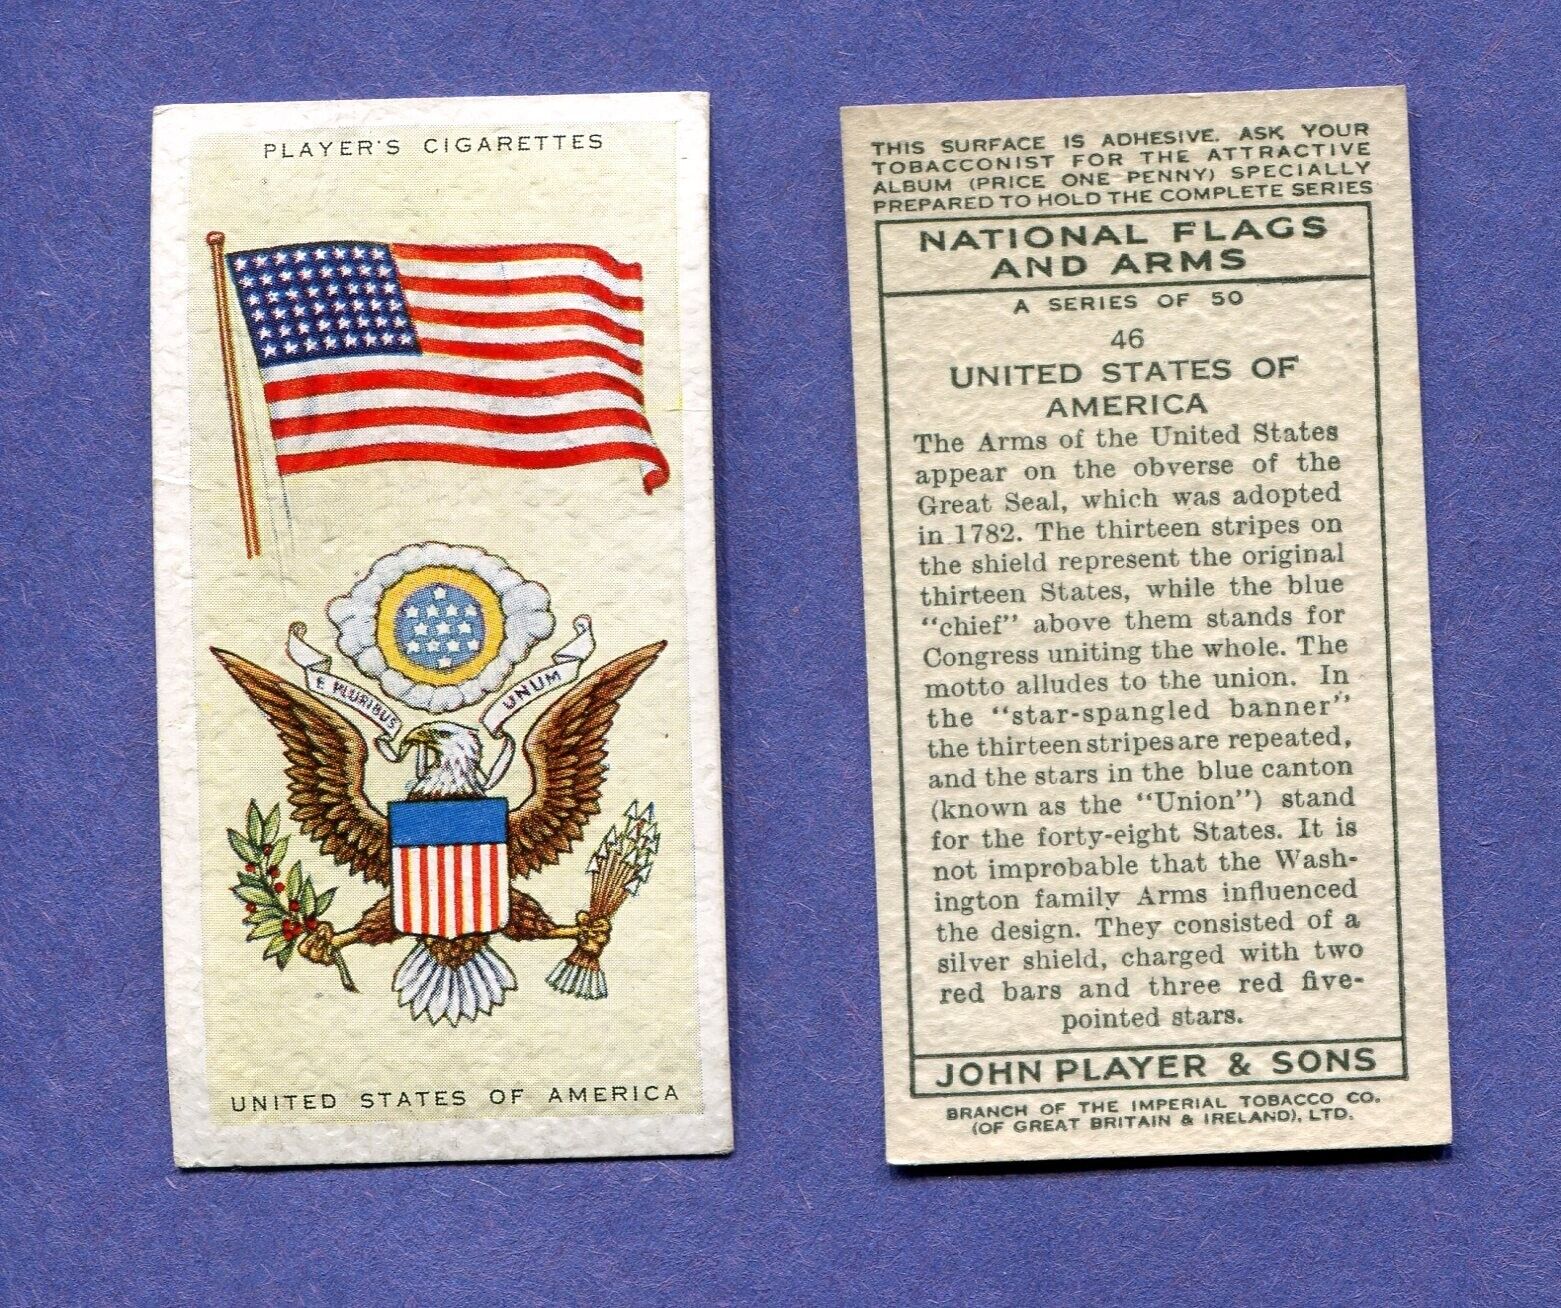 1936 JOHN PLAYER & SONS CIGARETTES NATIONAL FLAGS AND ARMS #46 USA AMERICA